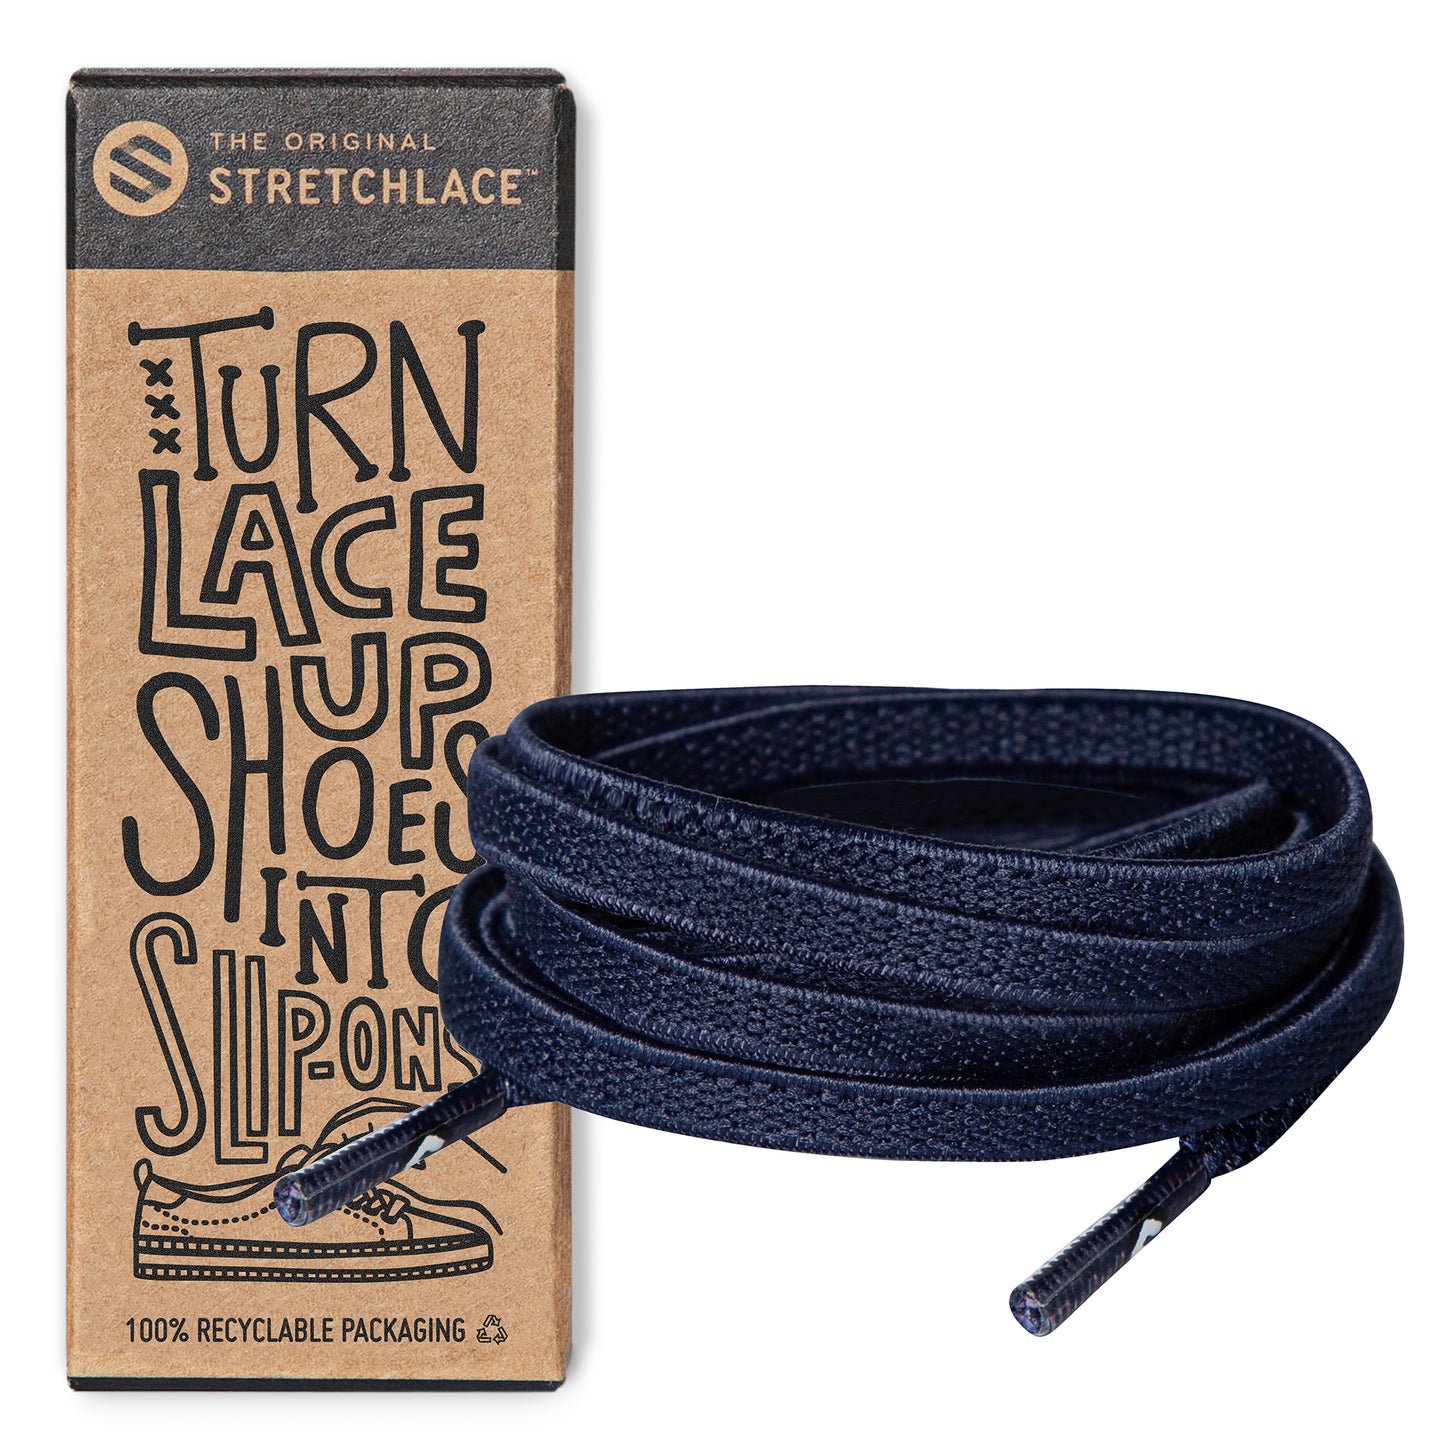 Flat leather cord - navy blue